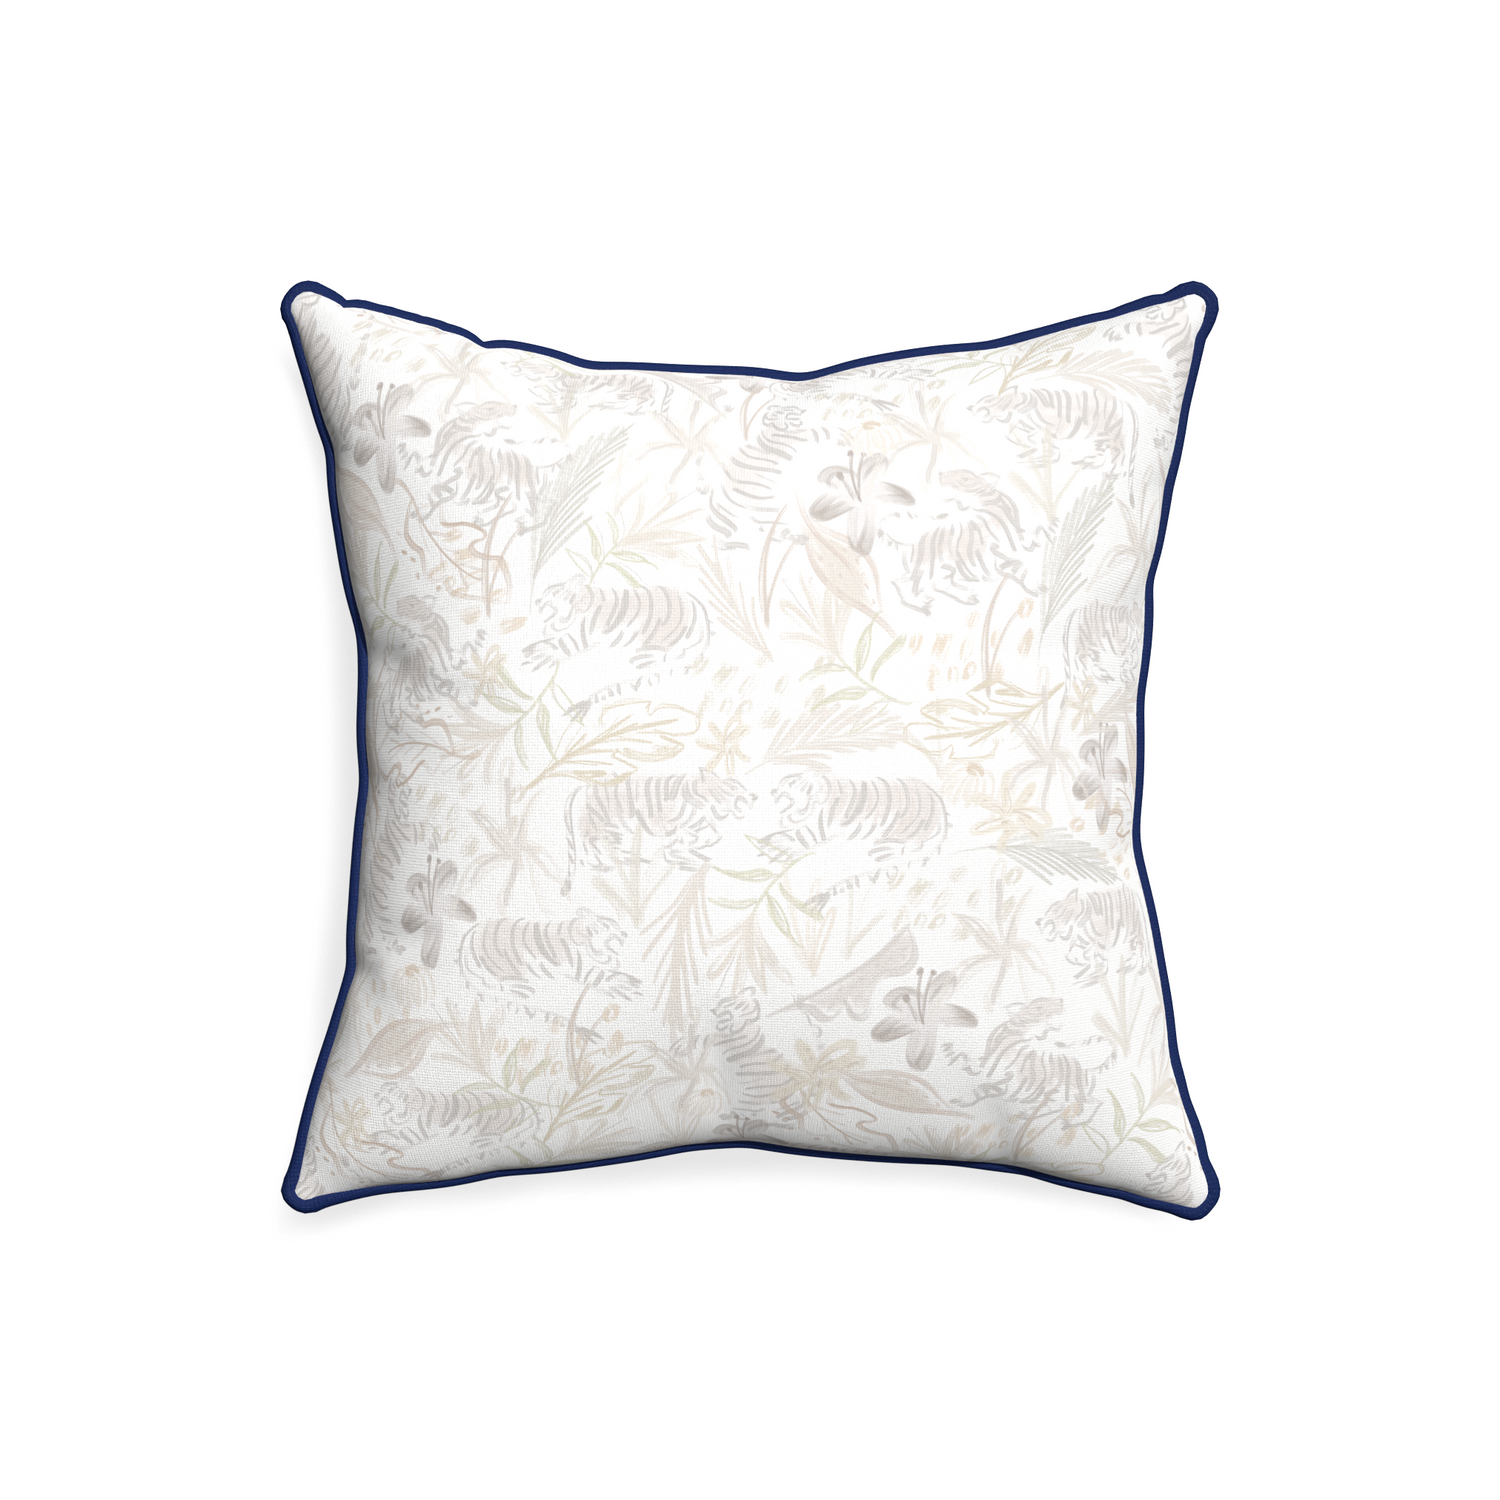 20-square frida sand custom beige chinoiserie tigerpillow with midnight piping on white background